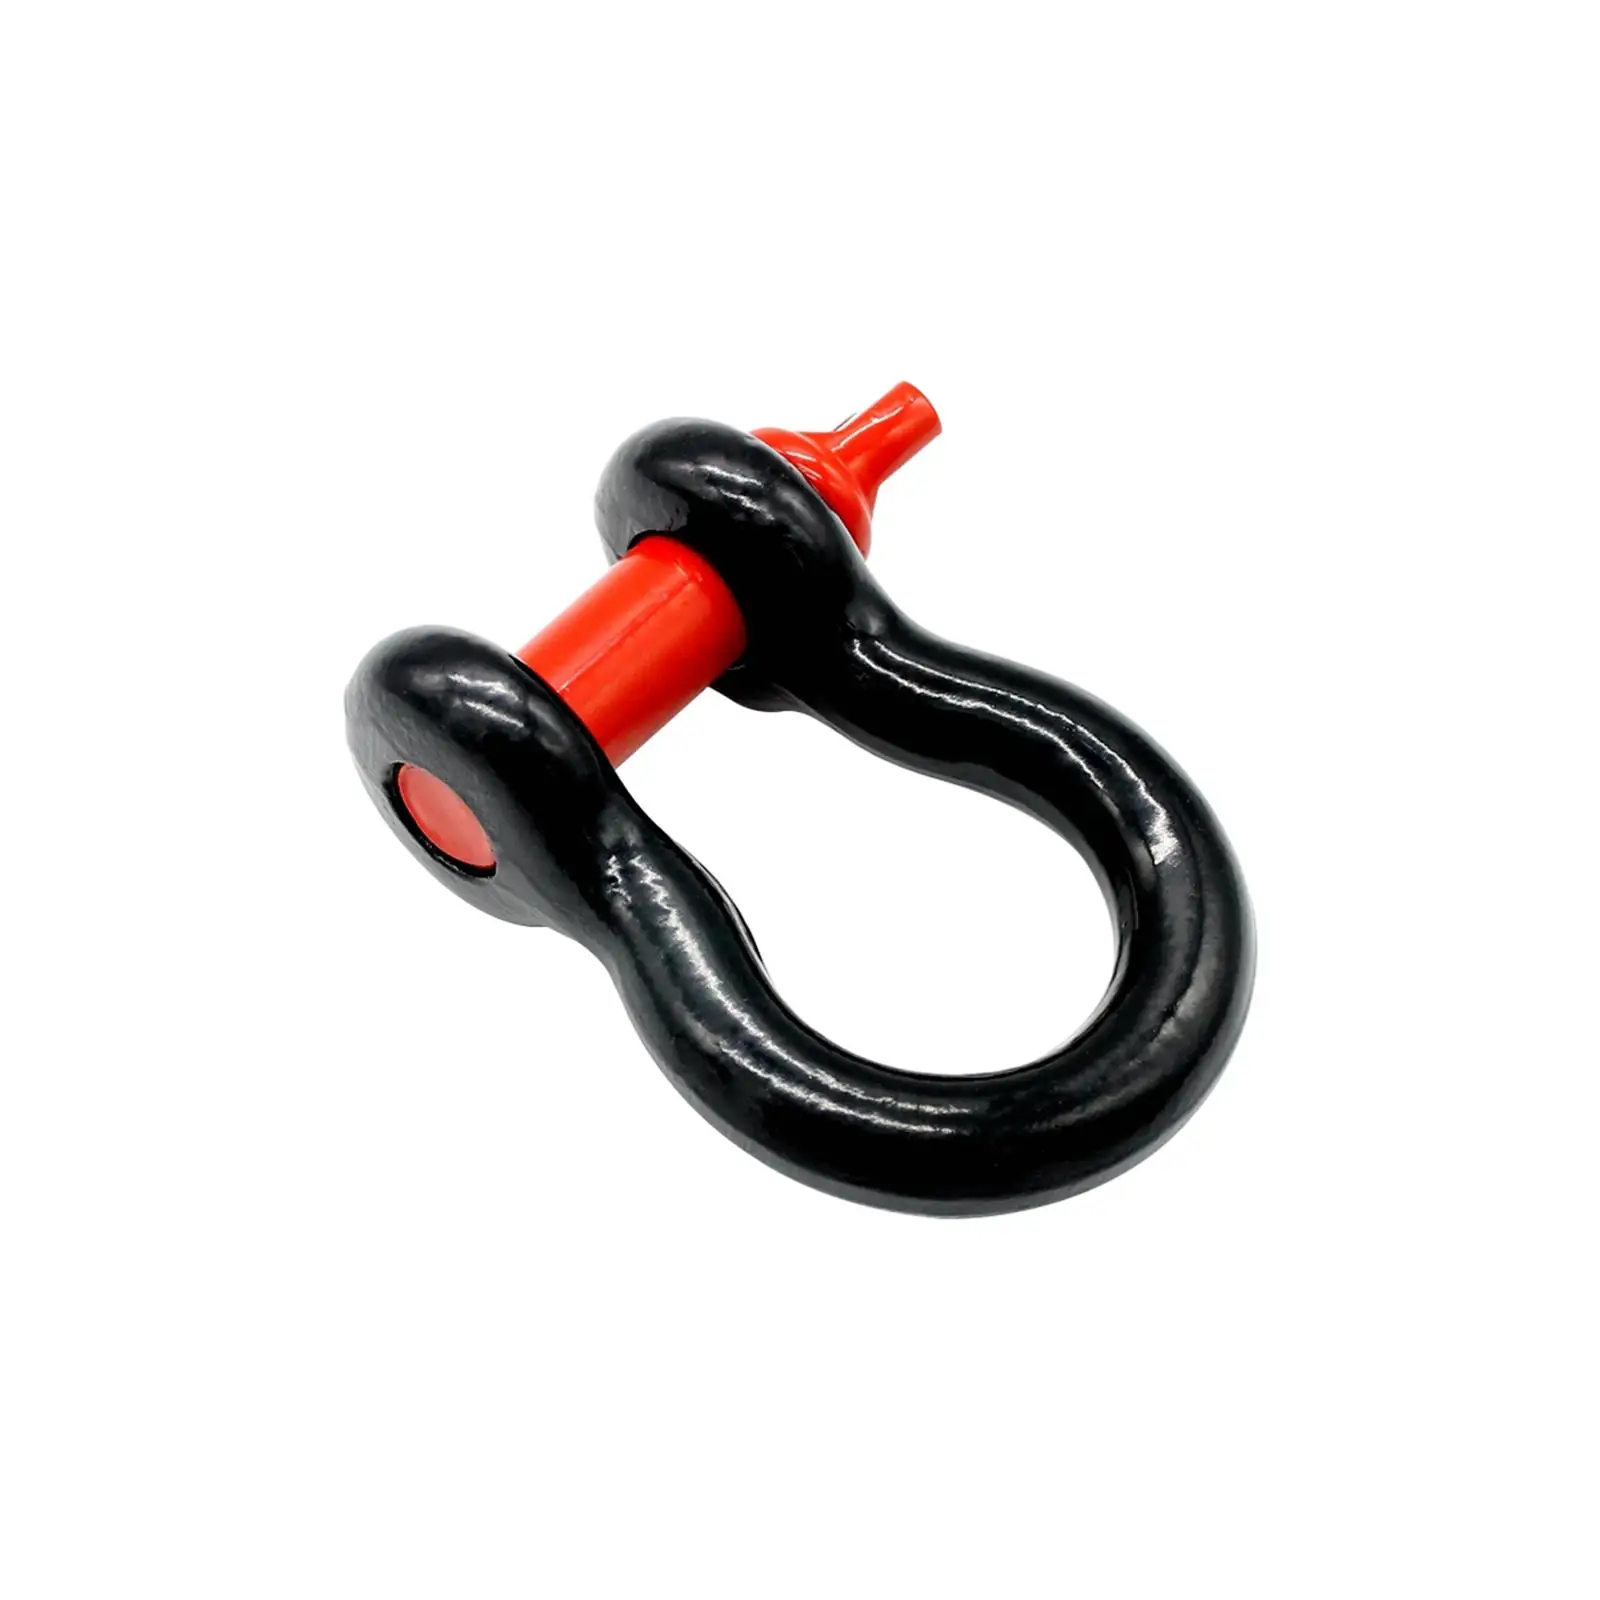 Car Tow Hook Ring D Ring Front Tow Hook Tow Rope Shackles Tow Hook Trailer for Vehicle Truck Automotive Accessories